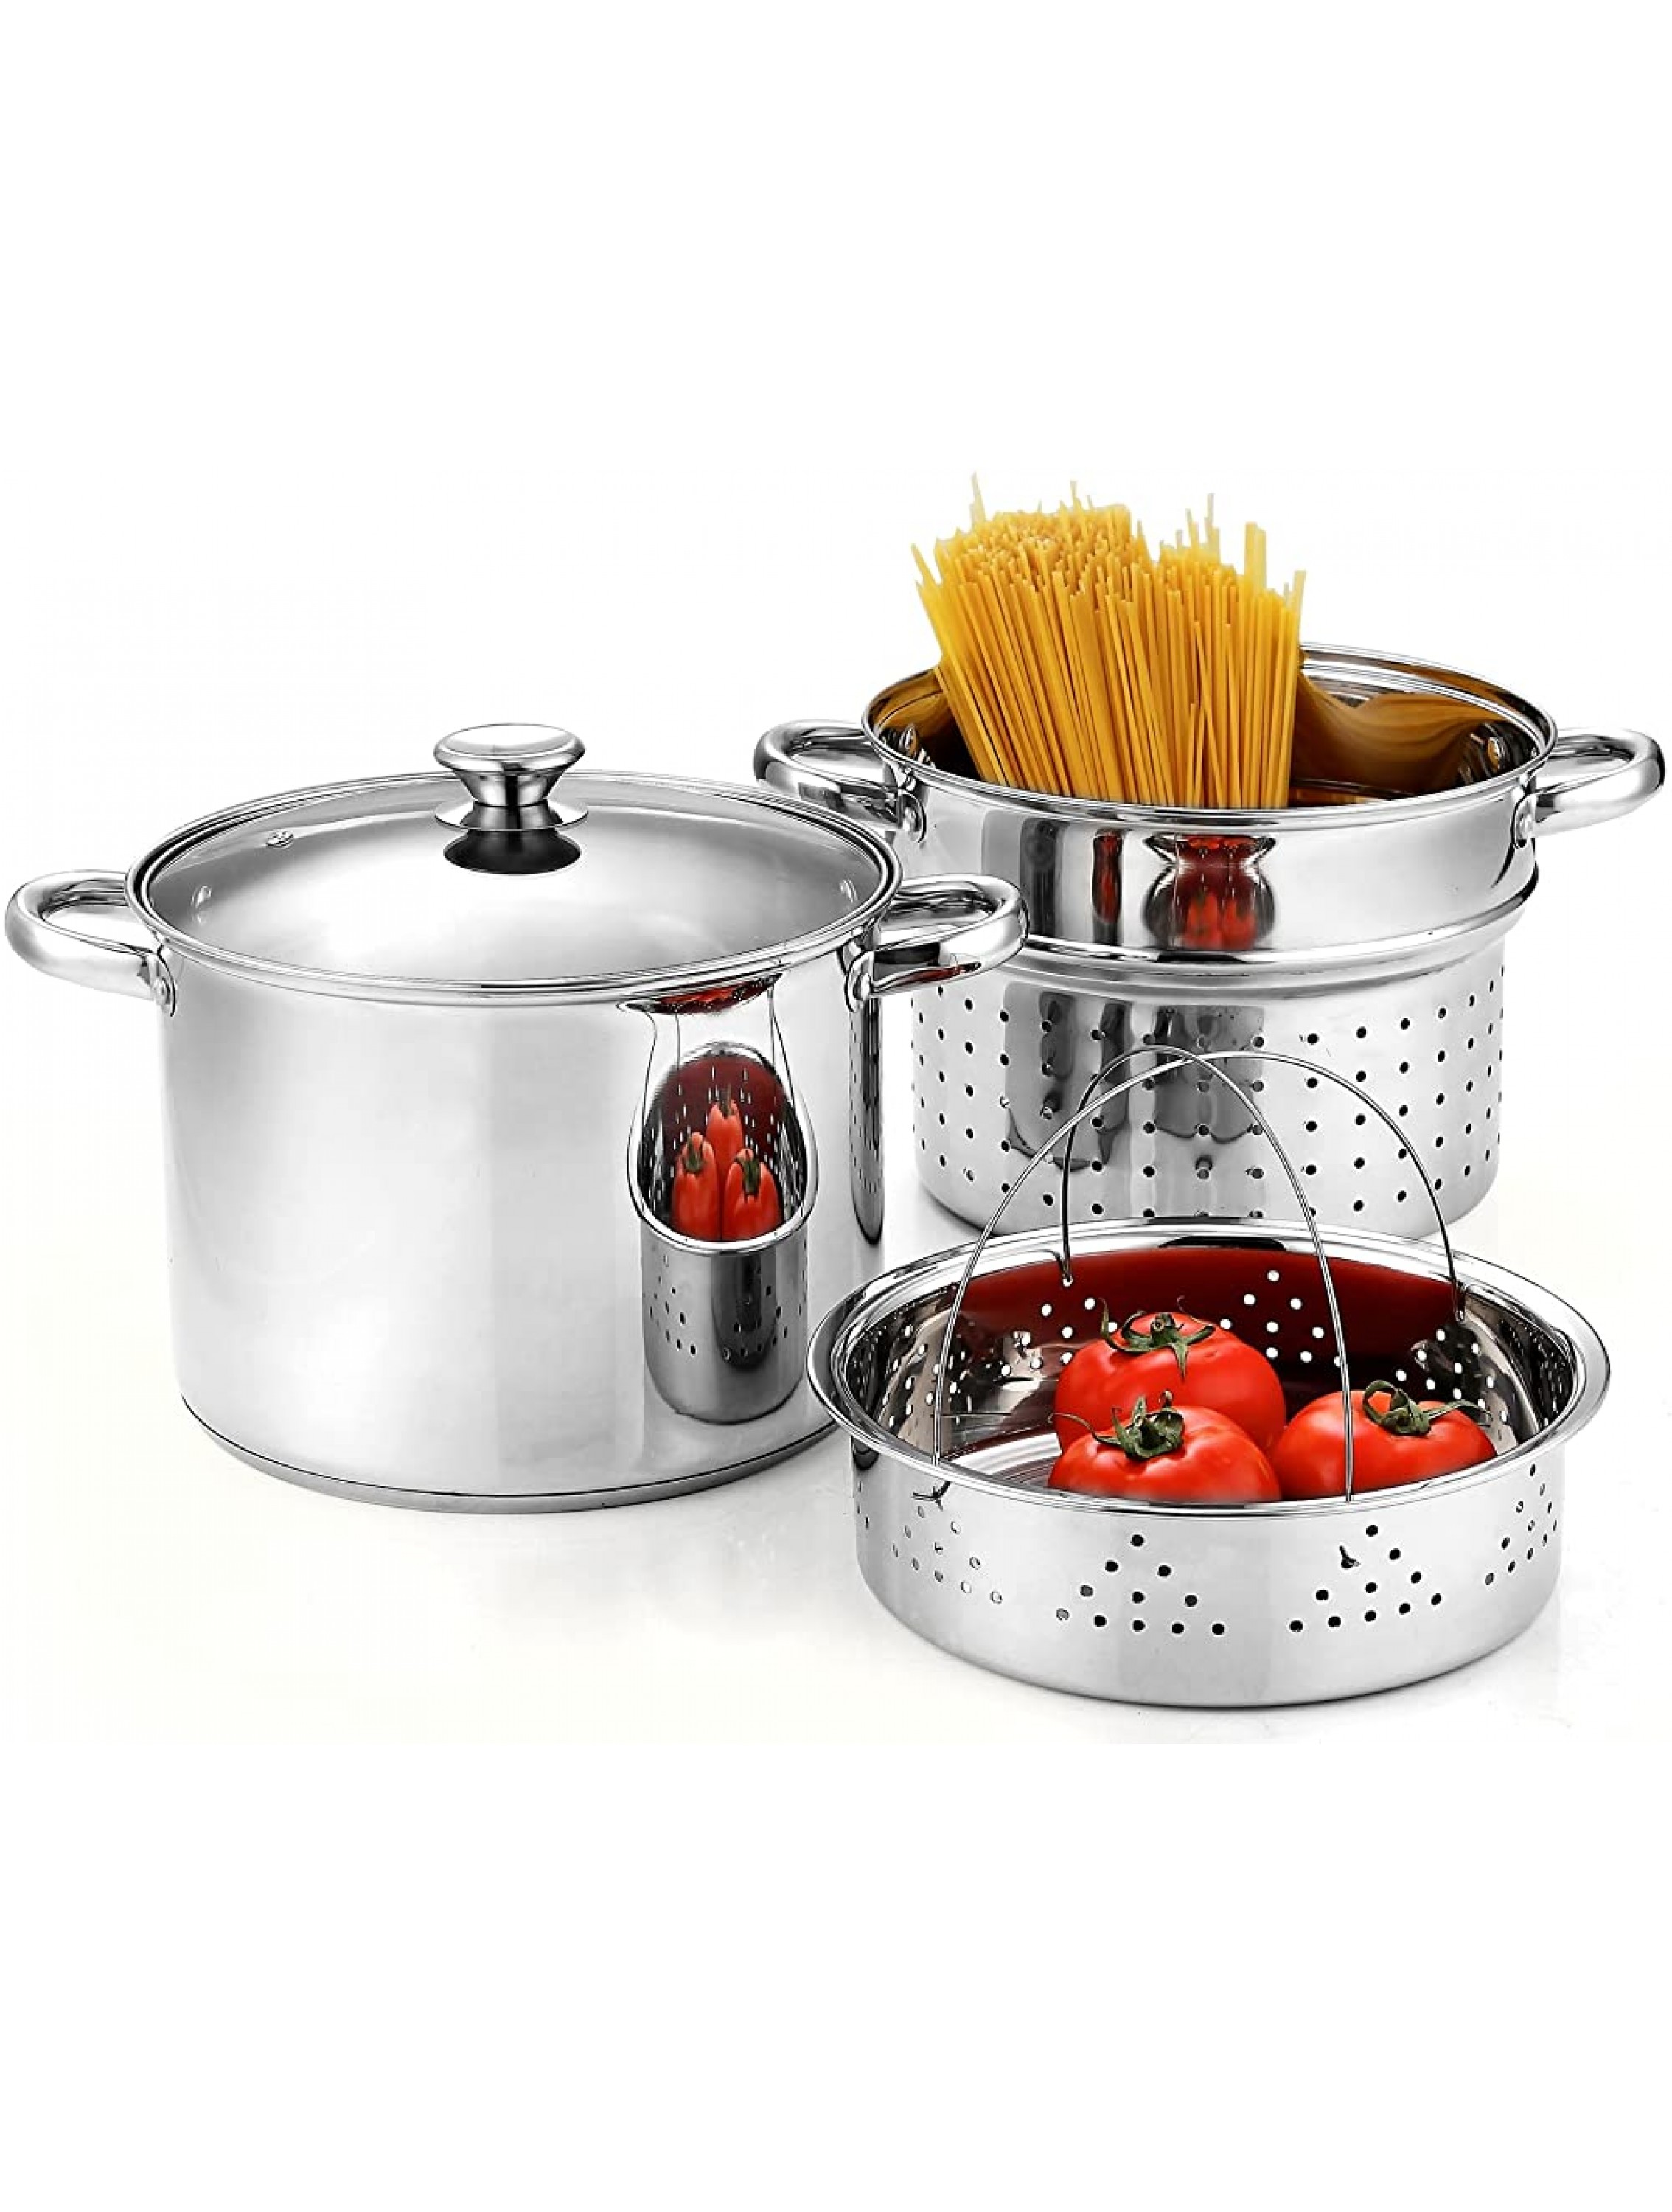 Cook N Home 4-Piece 8 Quart Multipots Stainless Steel Pasta Cooker Steamer - B87EIPRCF